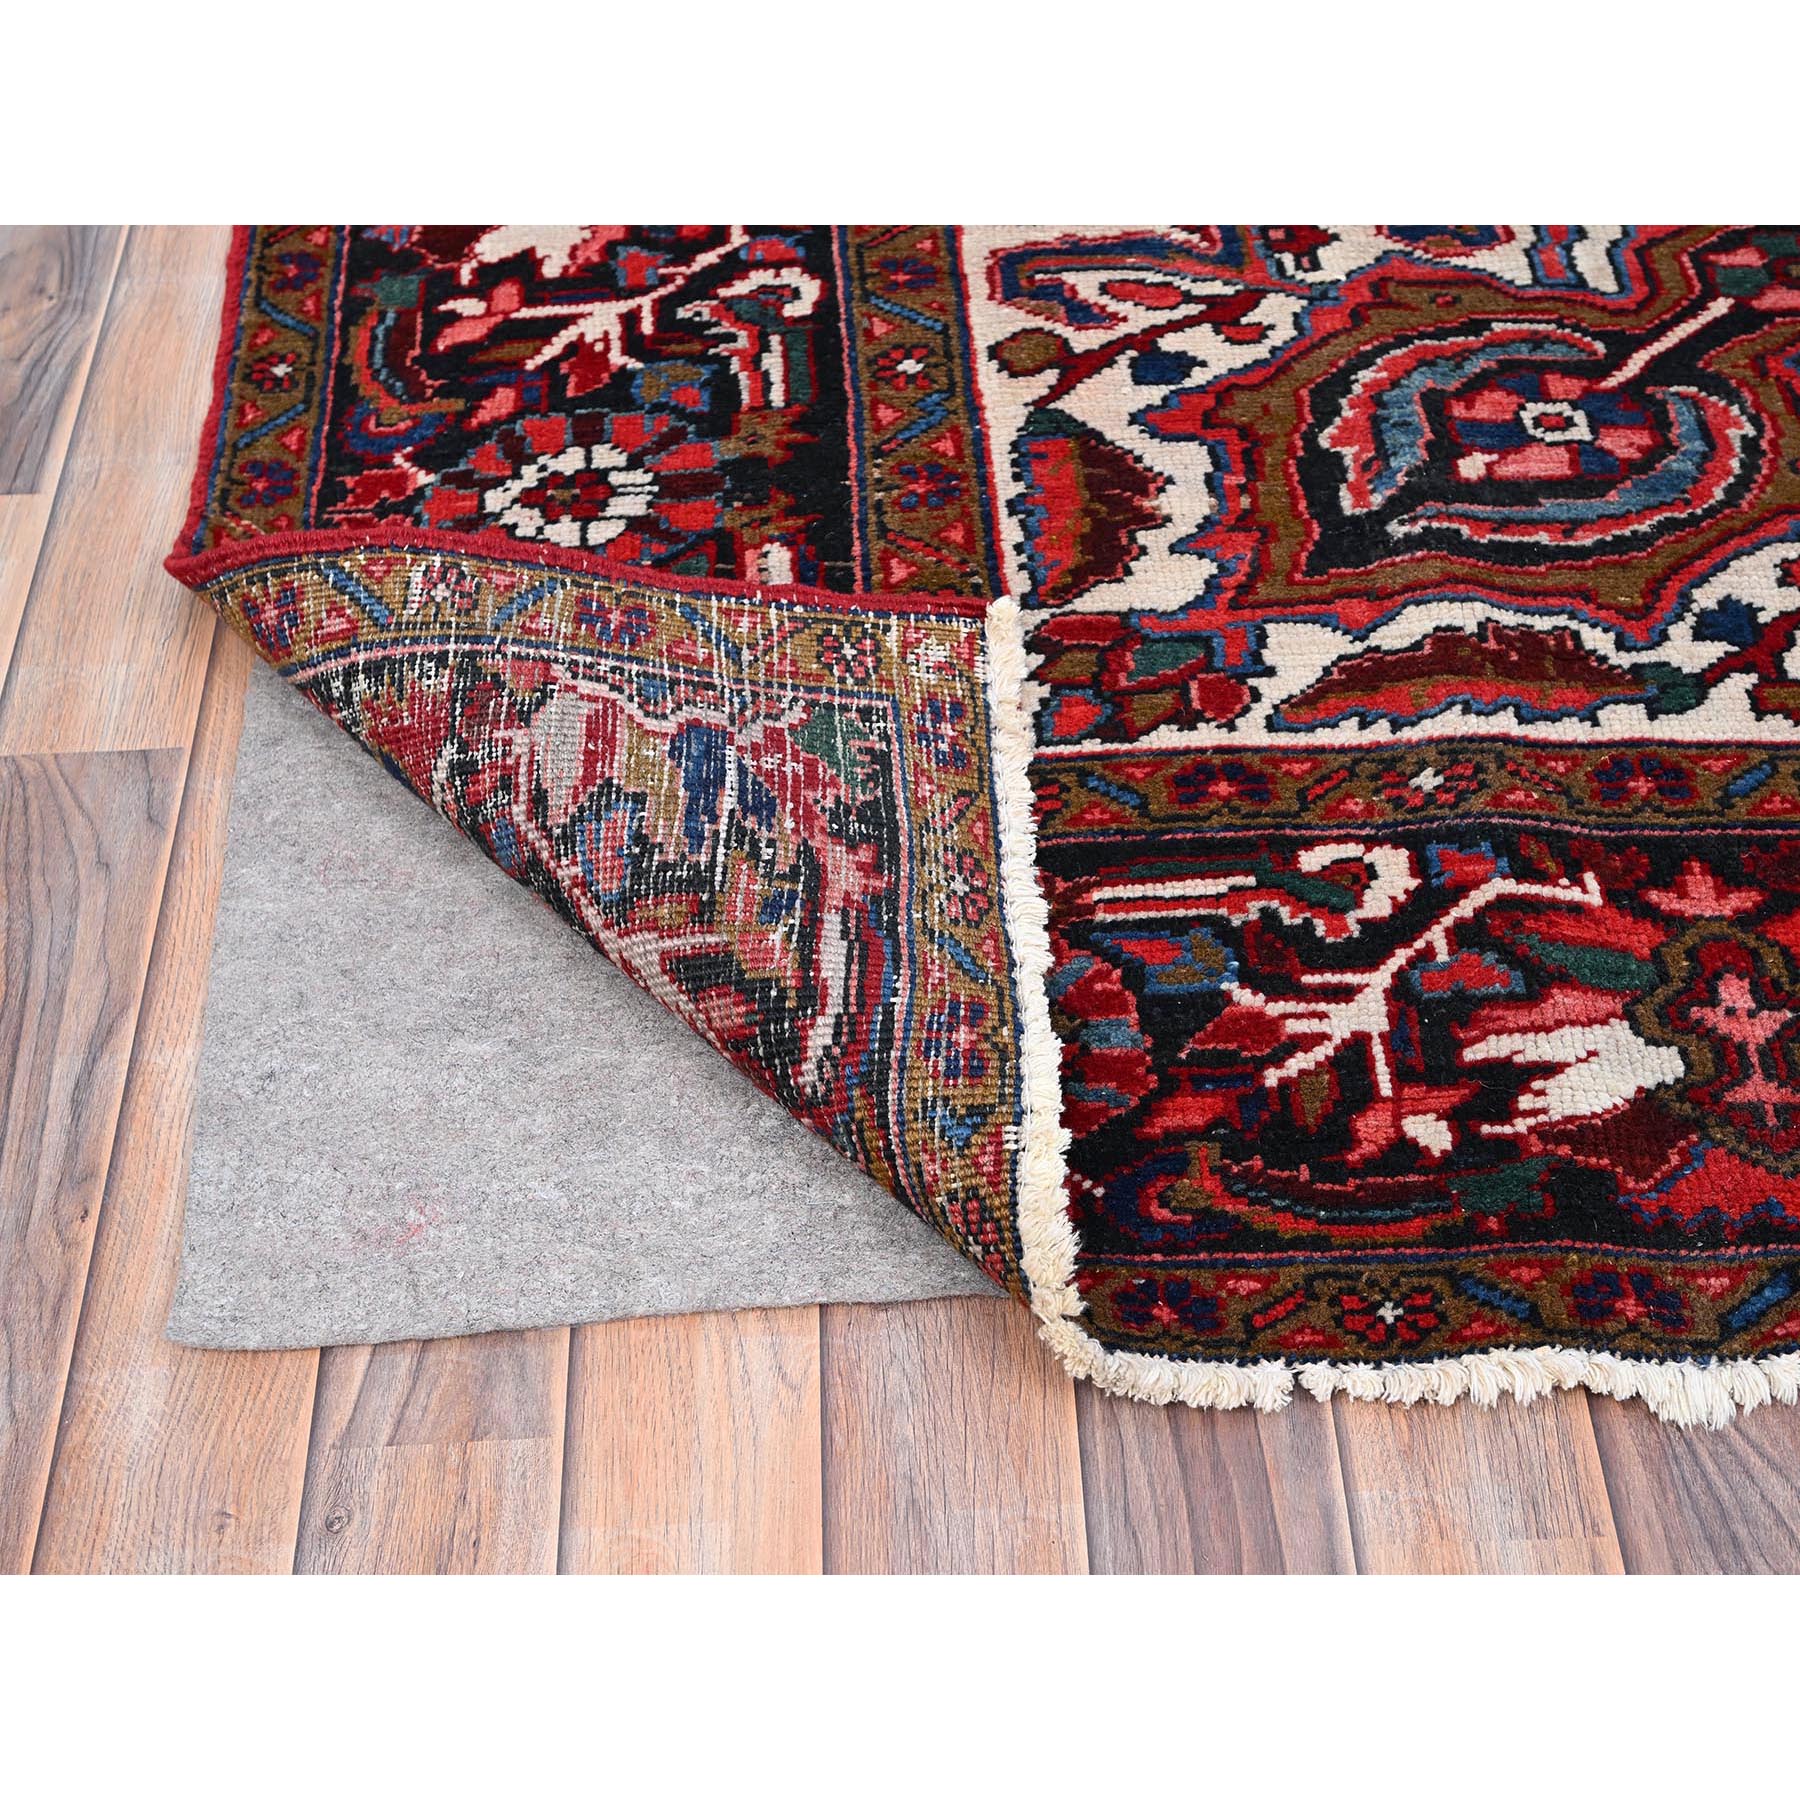 8'8"x12'1" Cardinals Red, Distressed Feel, Evenly Worn, Pure Wool, Hand Woven, Semi Antique Persian Heriz, Good Condition, Oriental Rug 